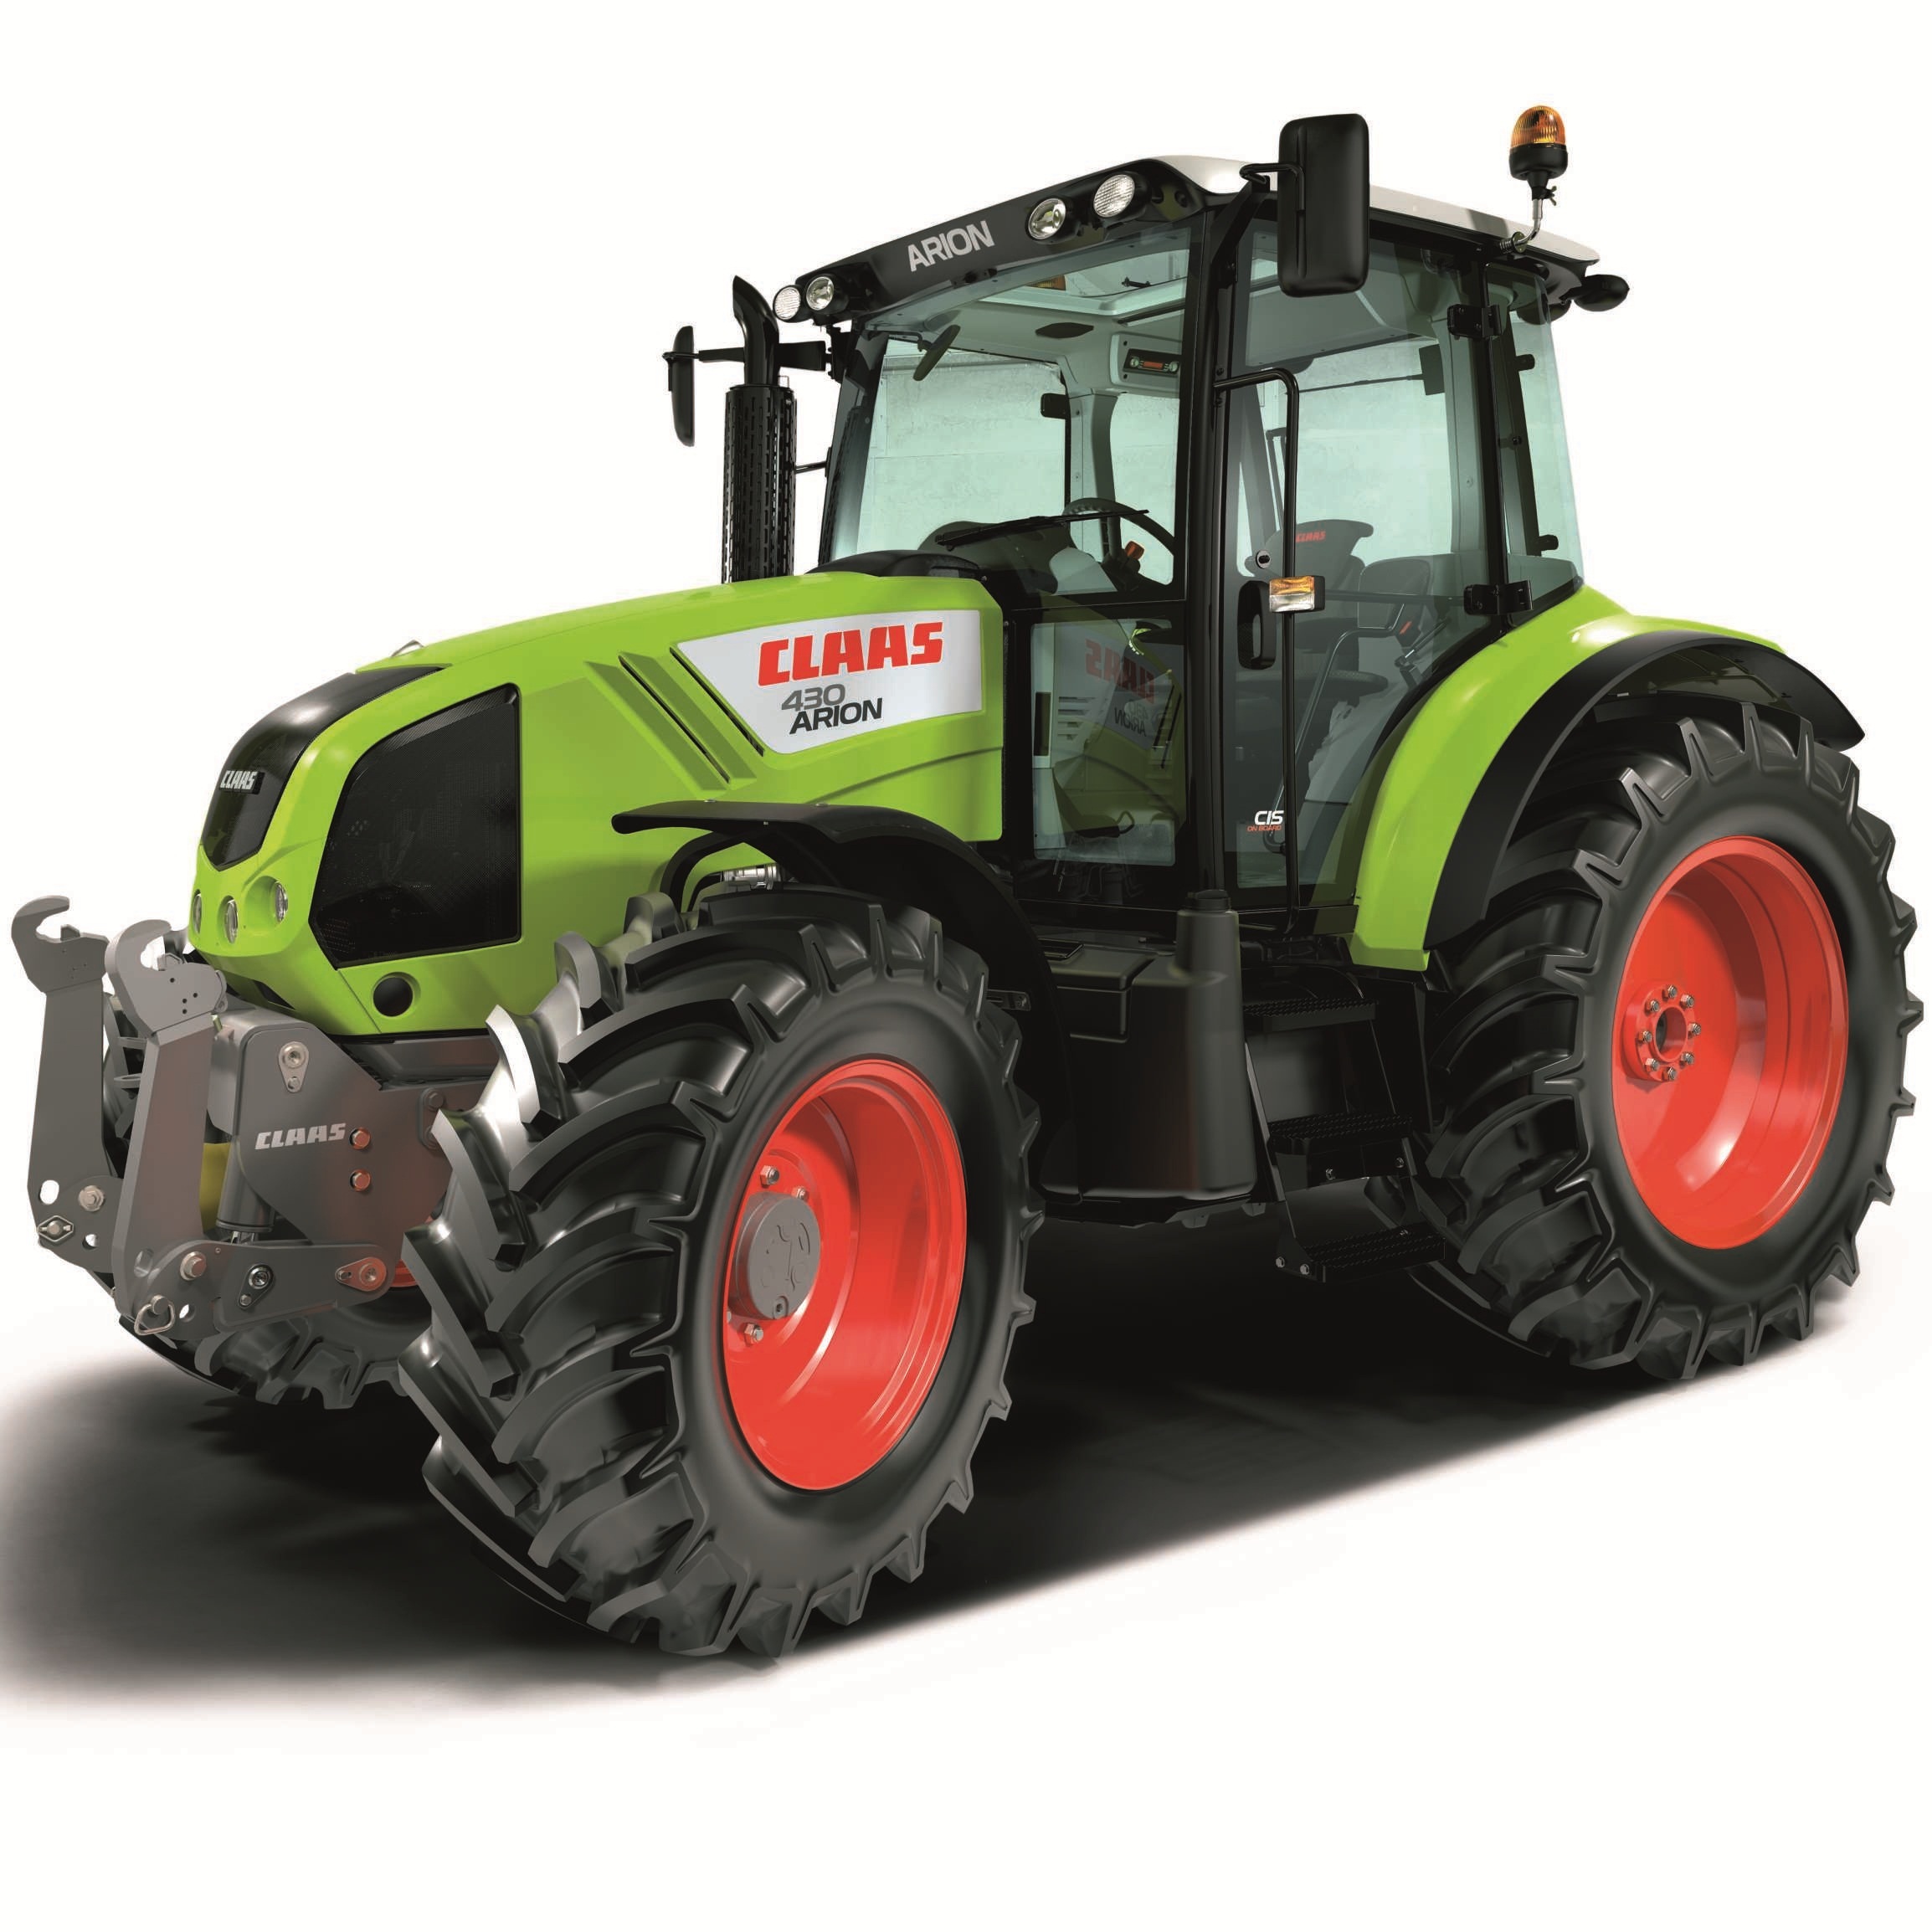 Fichiers Tuning Haute Qualité Claas Tractor Arion 430 CIS 4-4525 CR JD z CPM 114hp